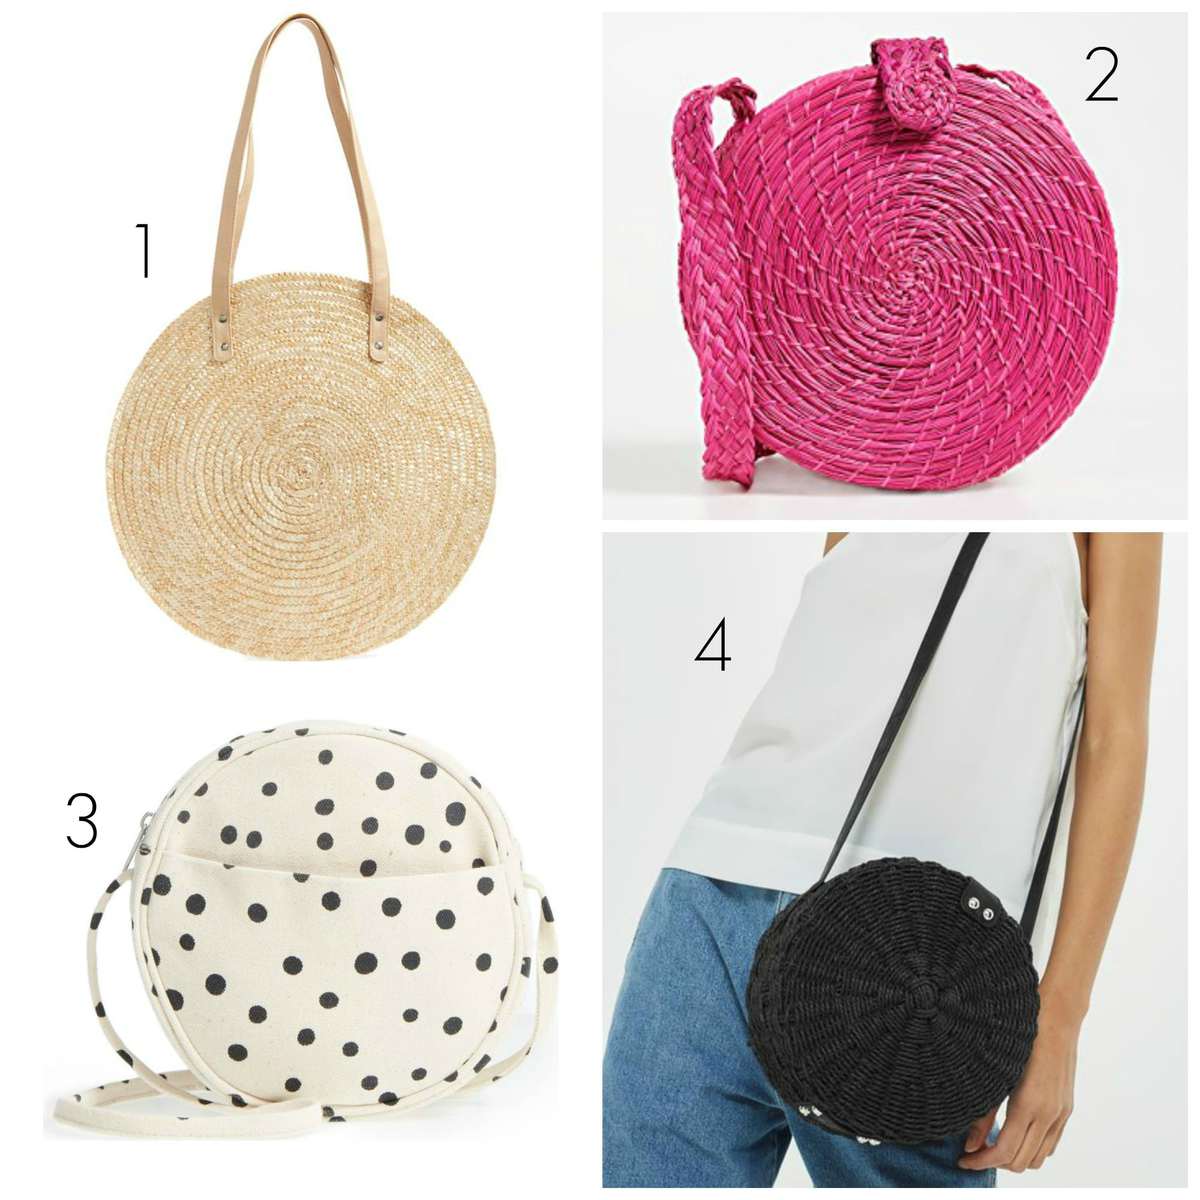 the best circle bags for spring and summer 2018 at all price points picked by Wardrobe Oxygen